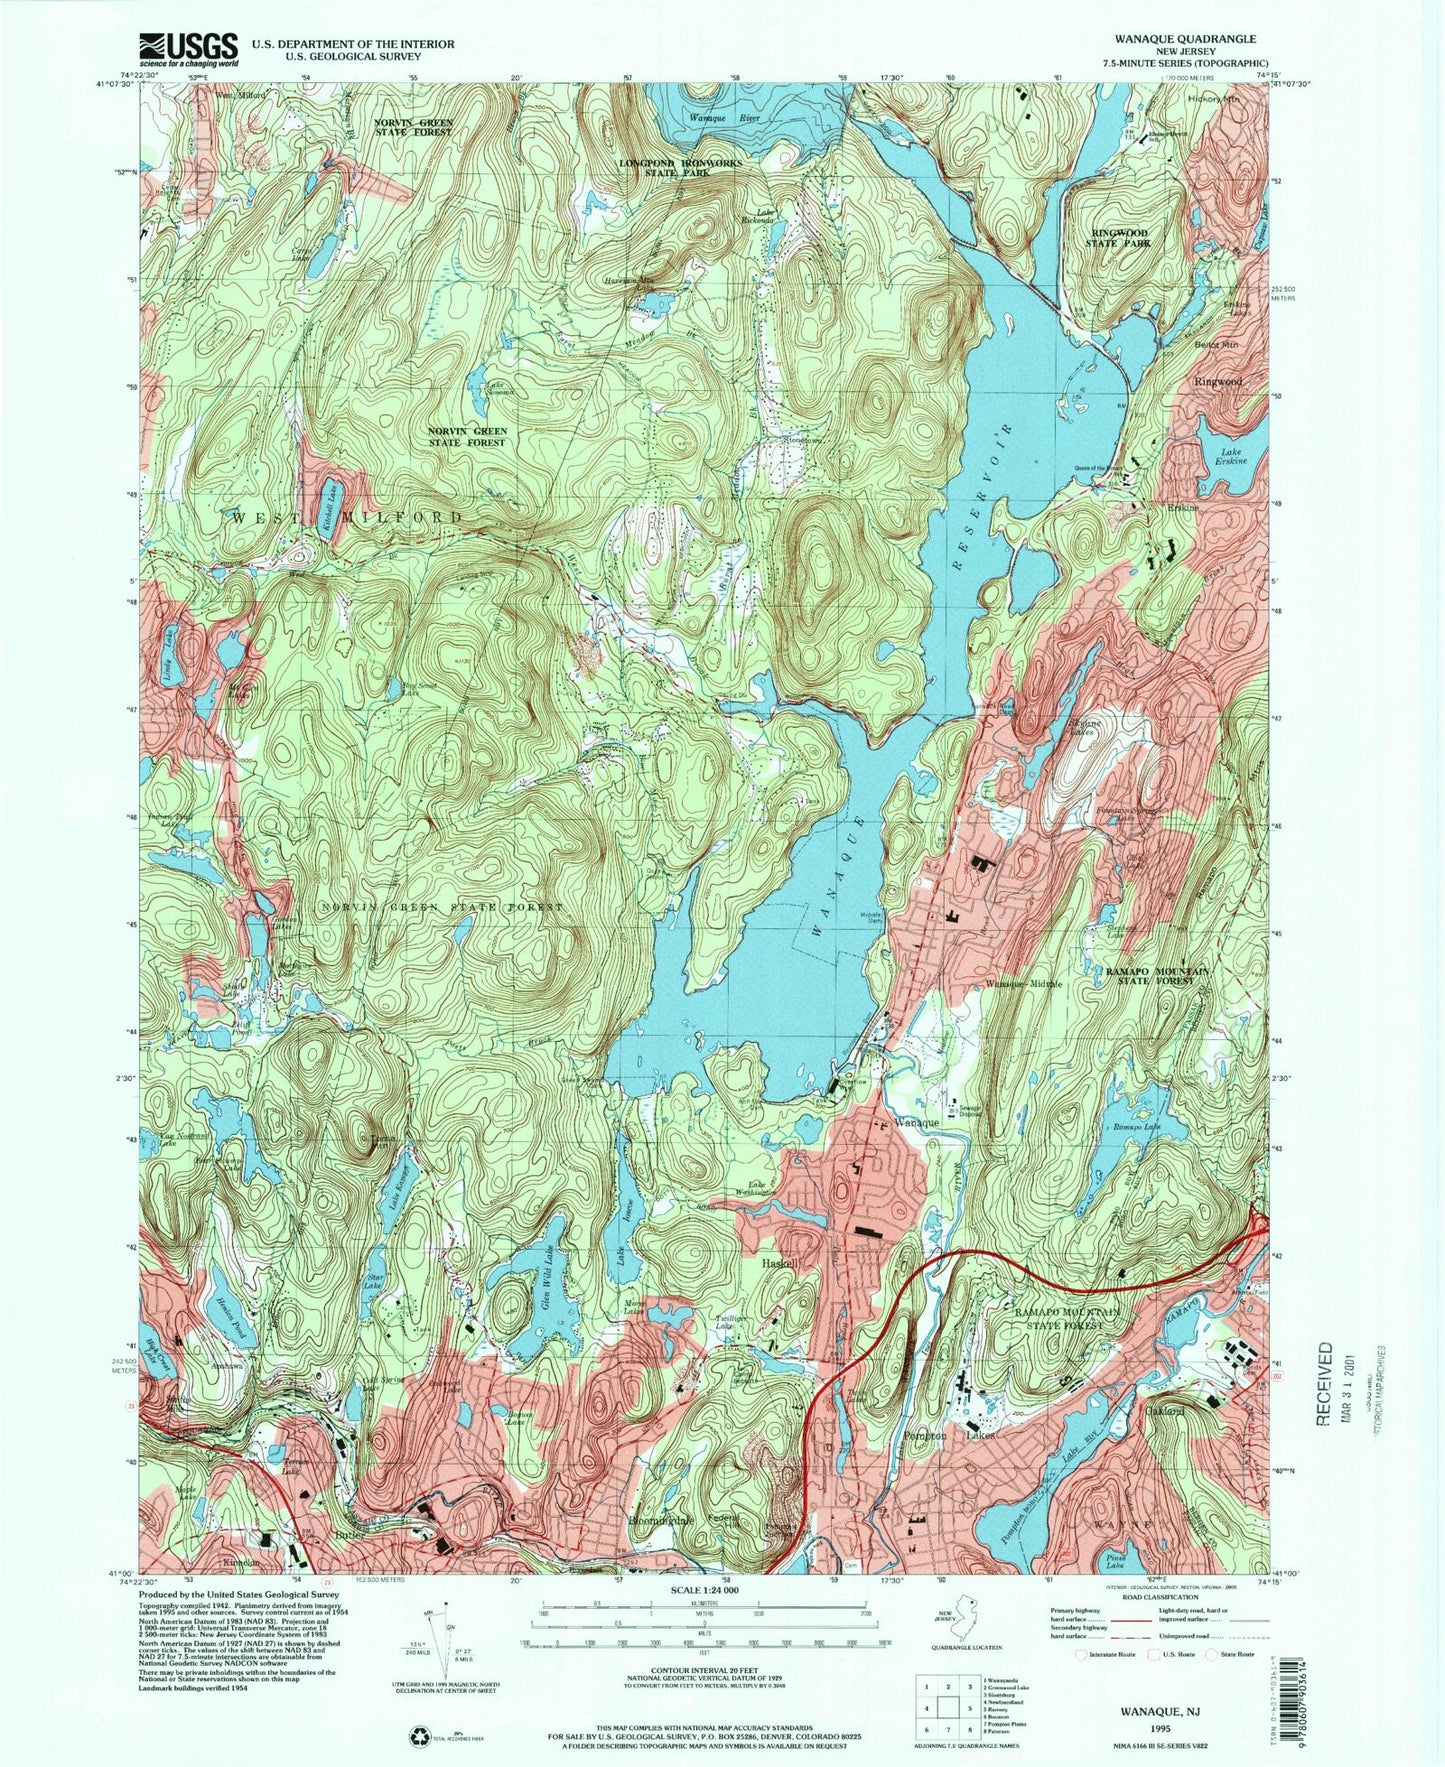 Classic USGS Wanaque New Jersey 7.5'x7.5' Topo Map Image